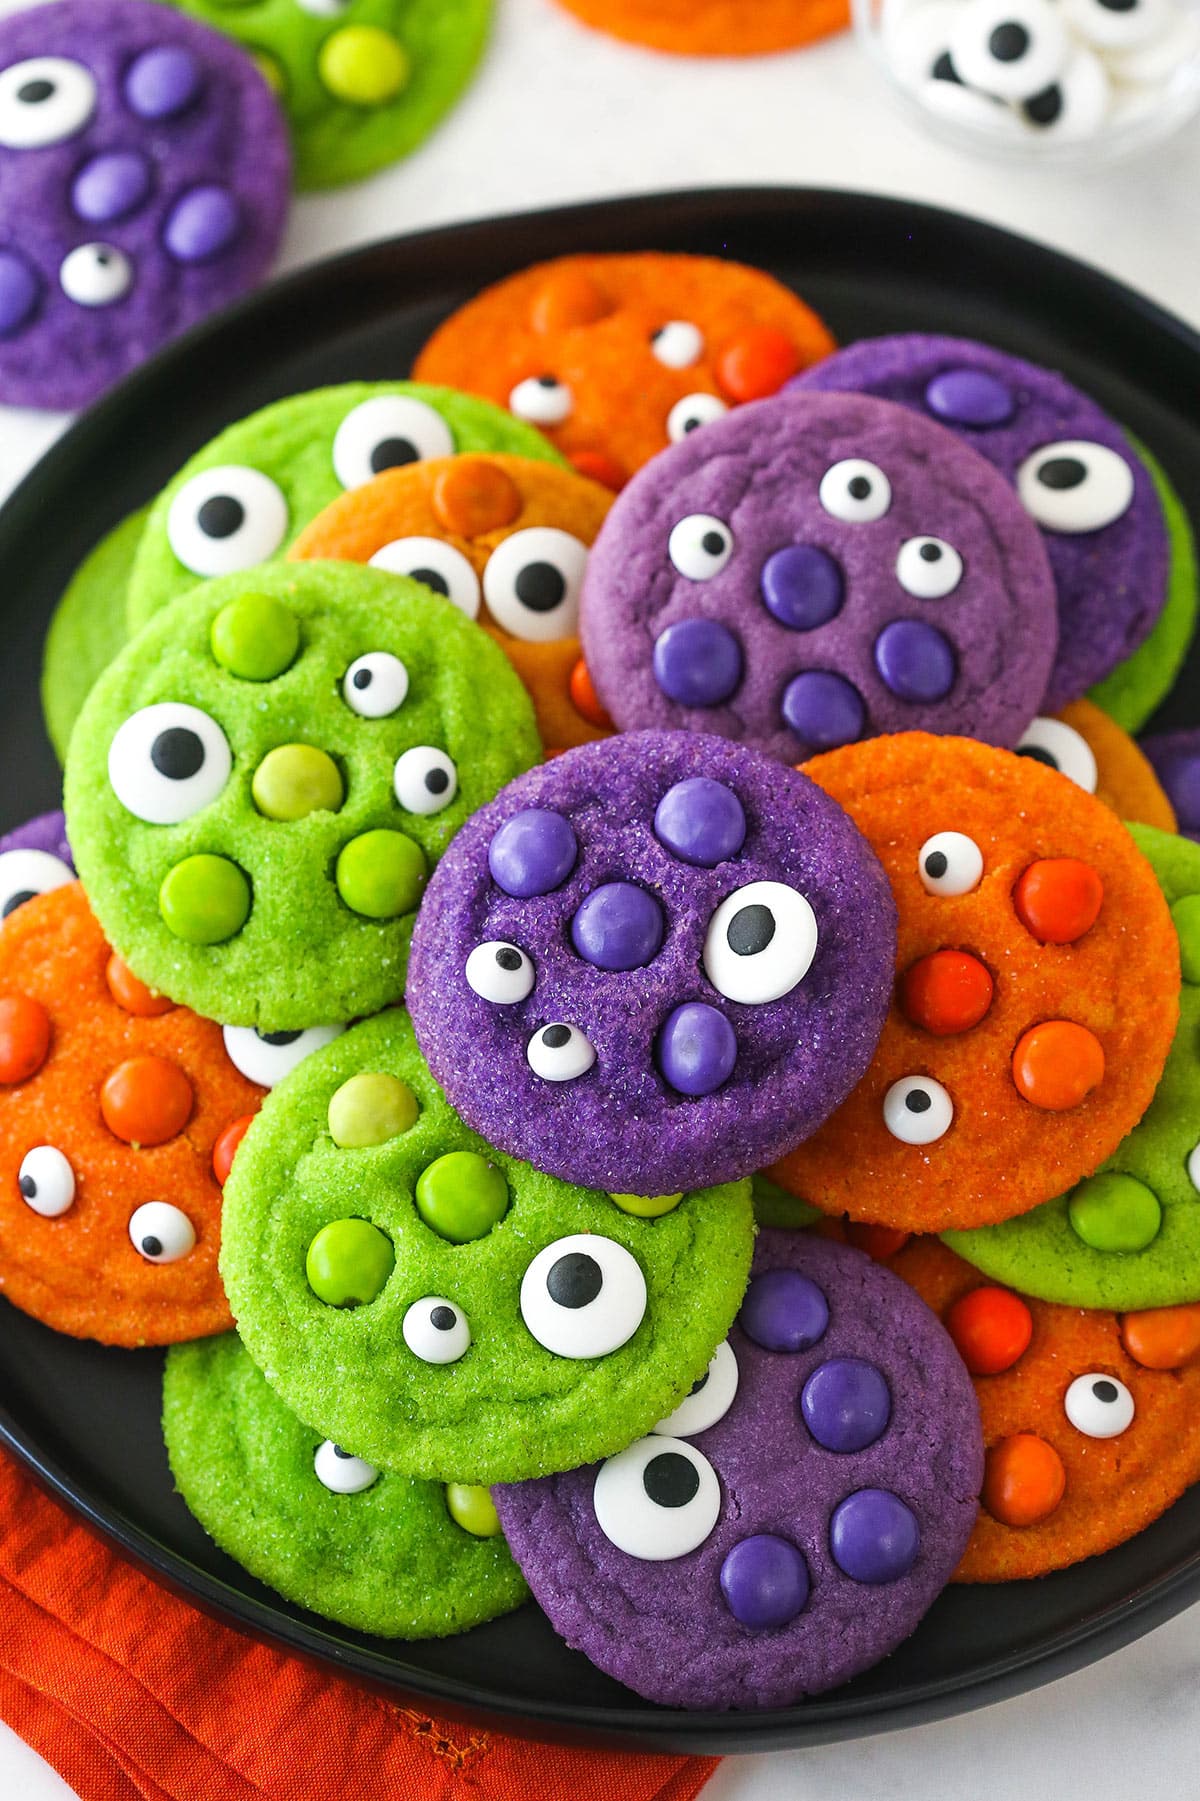 A pile of brightly colored Halloween Monster Cookies on a black plate.